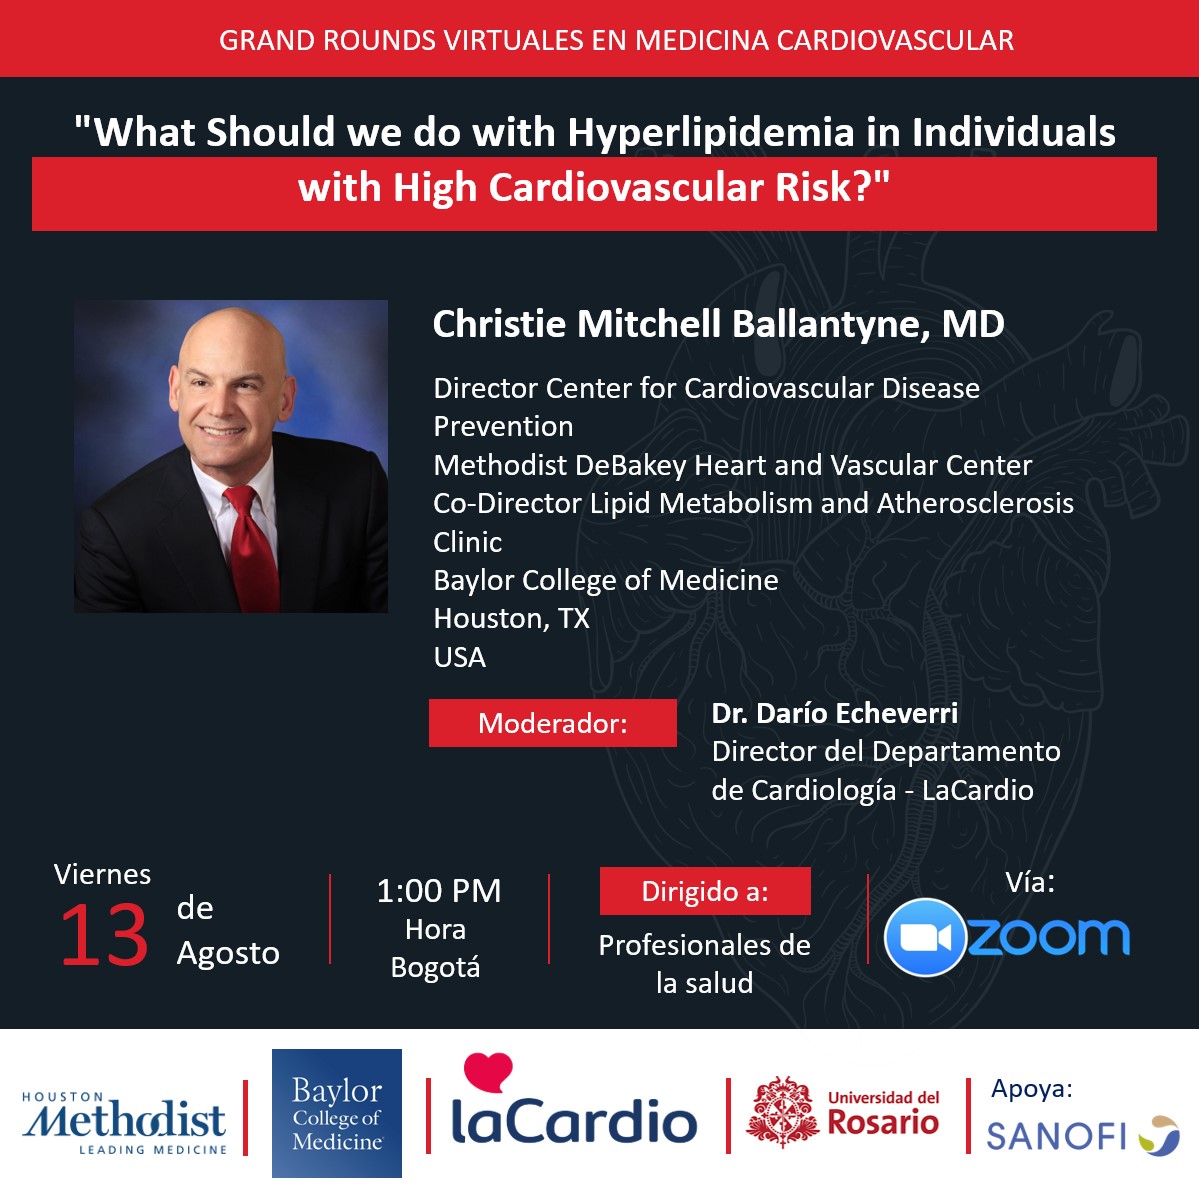 Grand Rounds en Medicina Cardiovascular: What should we do with hyperlipidemia in individuals with high cardiovascular risk?